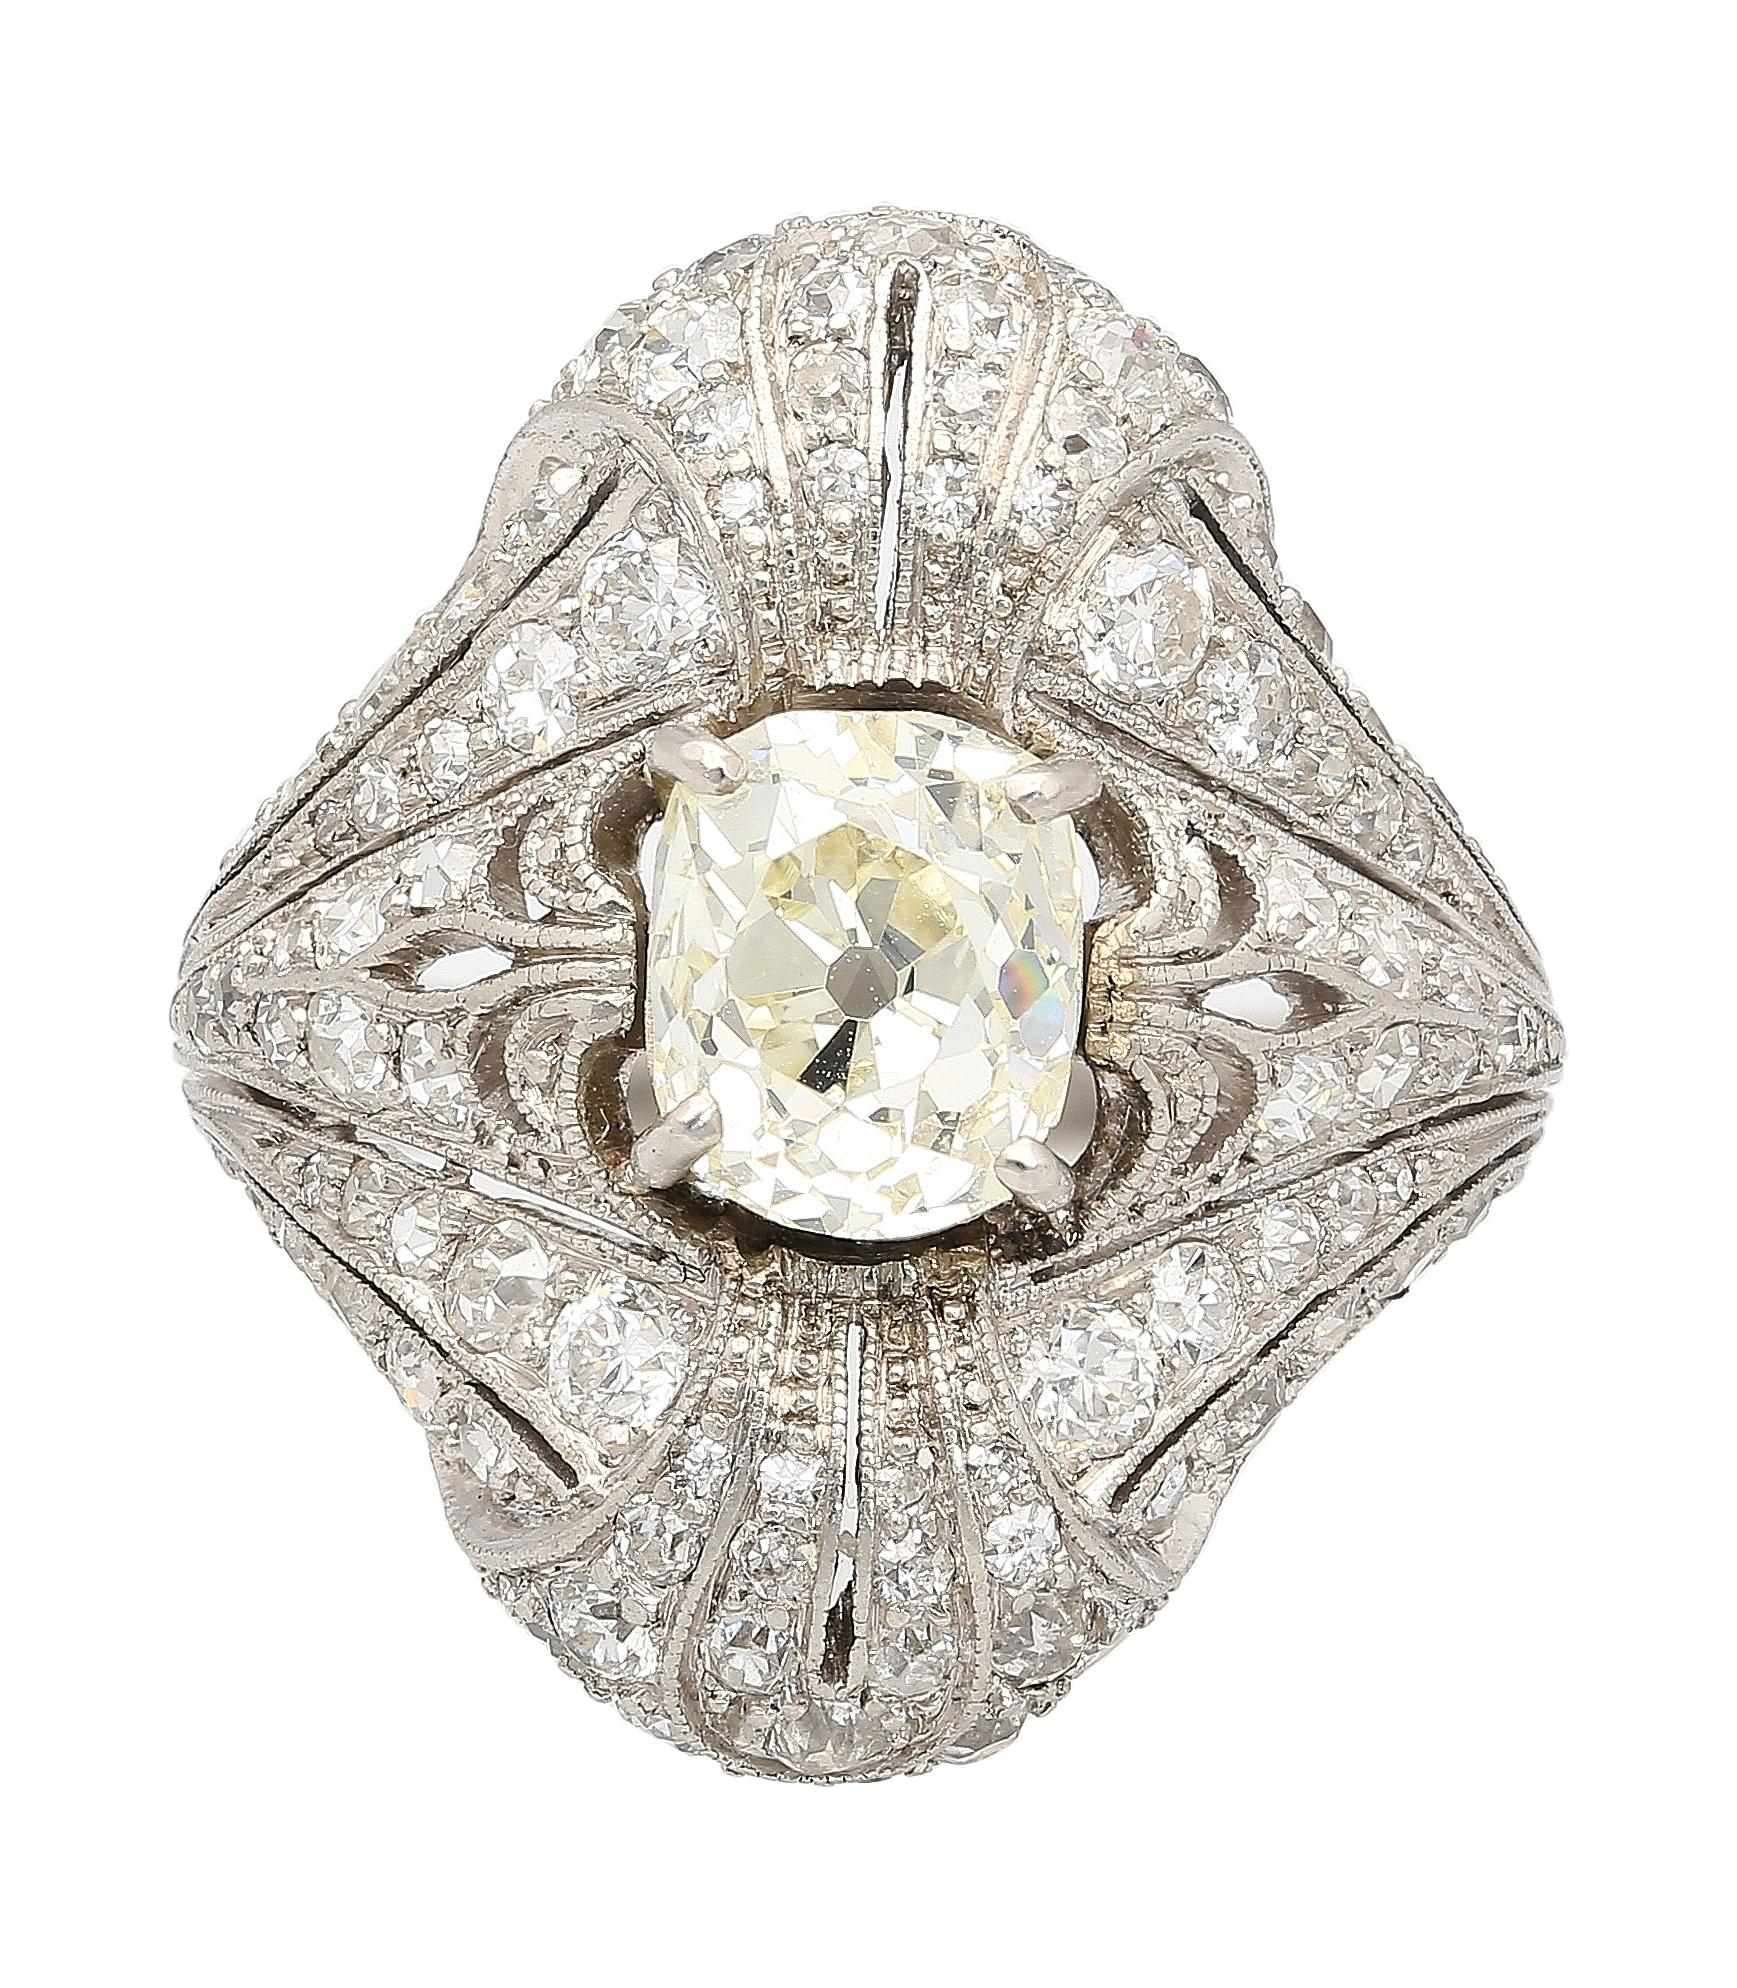 Original Art Deco old cut diamond ring in platinum. Long vertical frame with a dome-shape shank that gives excellent coverage on the finger. Precise filigree and milgrain workmanship with 98 diamond pointers throughout the setting. This ring, in its